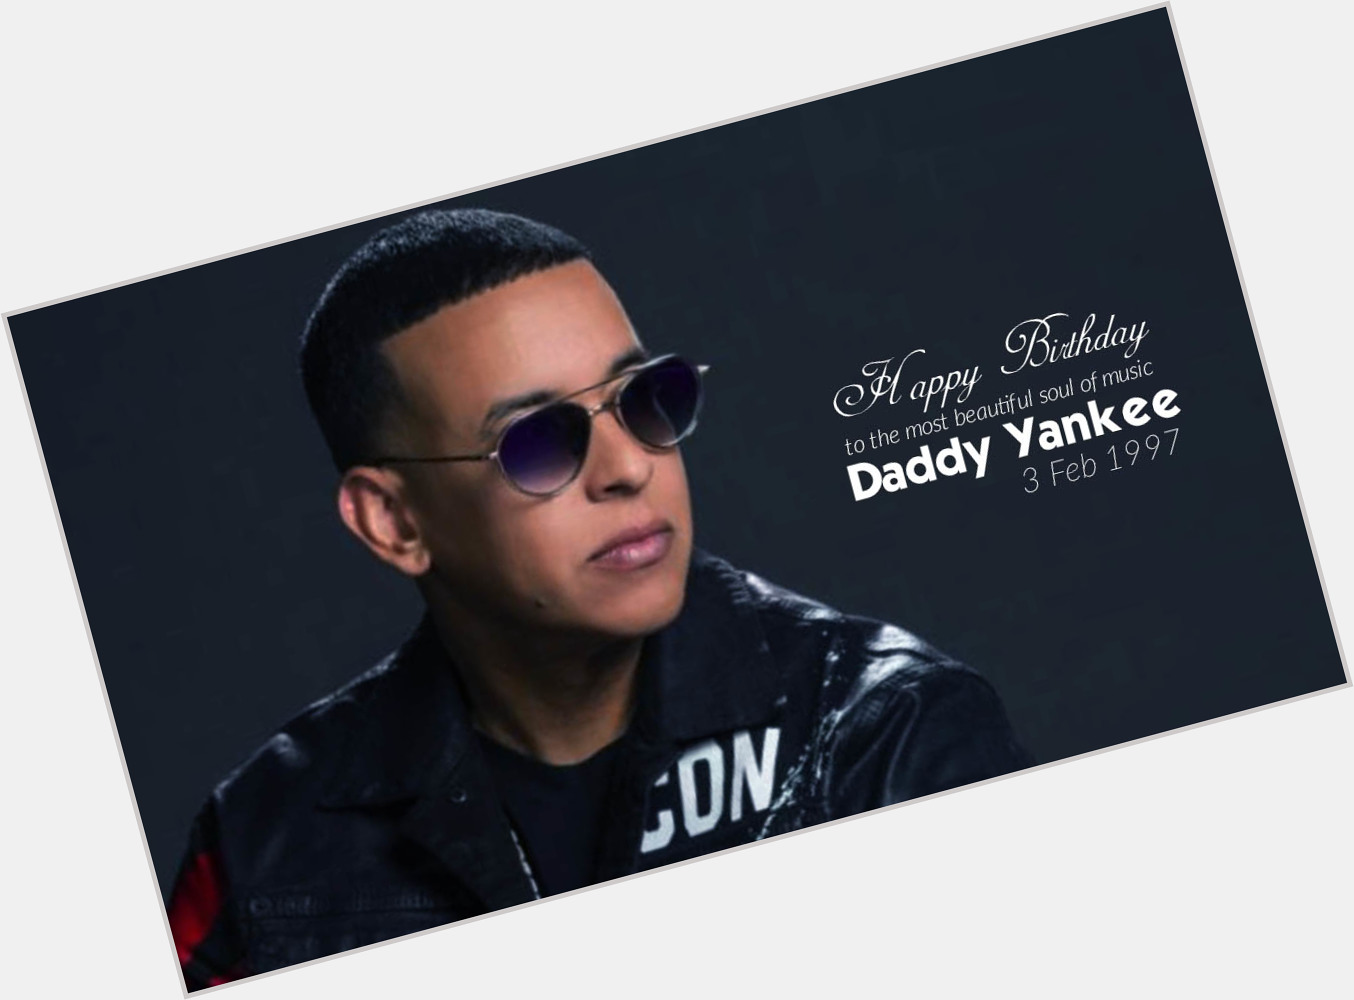 Happy Birthday to the most beautiful soul of music Daddy Yankee, born on 3 Feb 1997. 